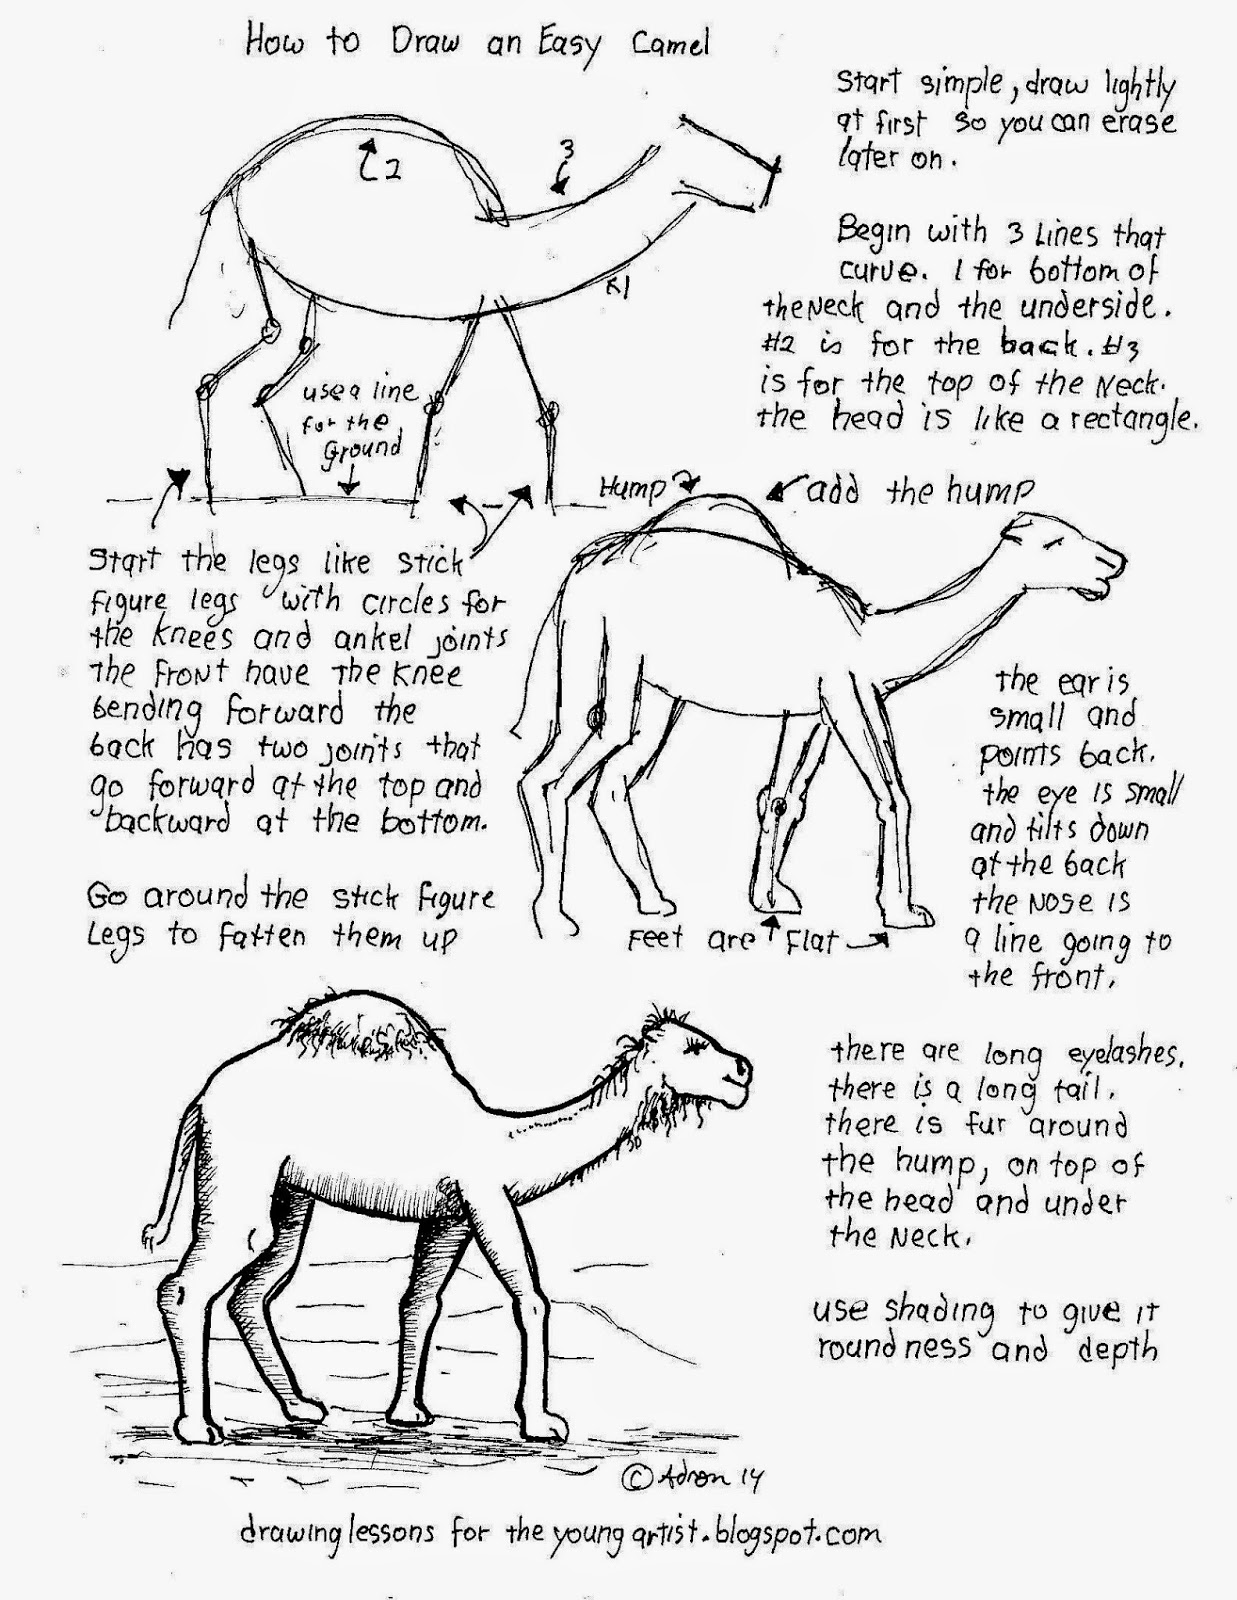 A printable how to worksheet for drawing a camel